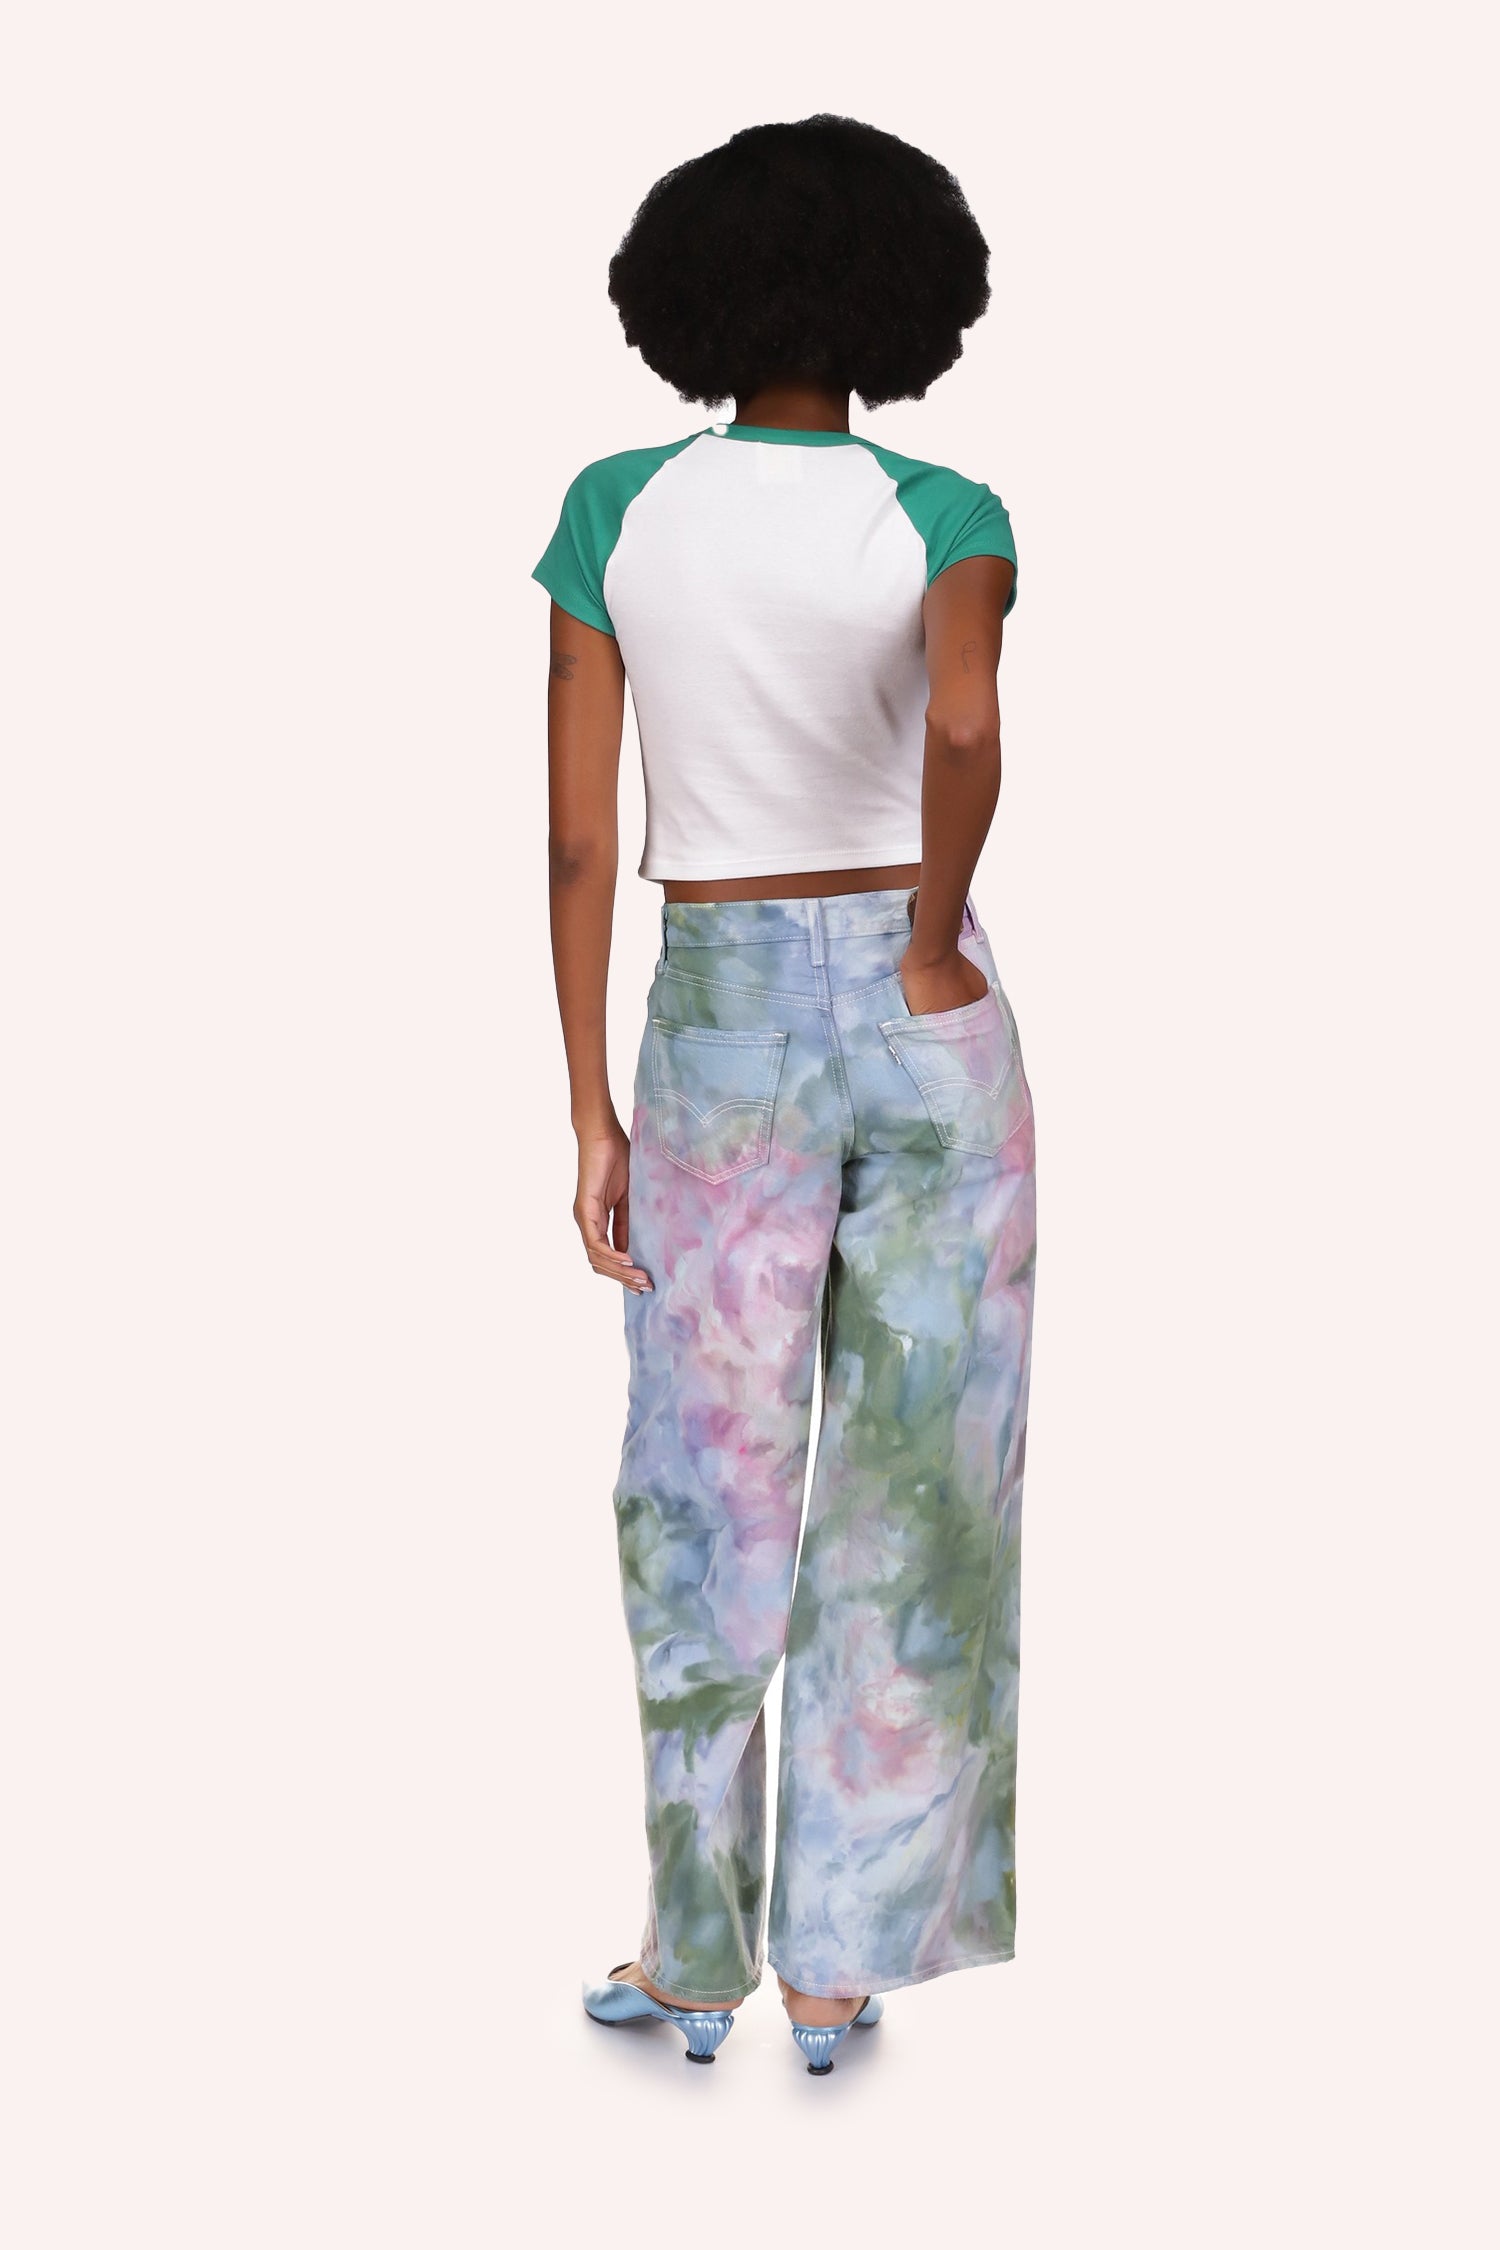 Ocean Tie Dye Wide Leg Jeans, green floral design with touch of pink, 2-pocket on the back